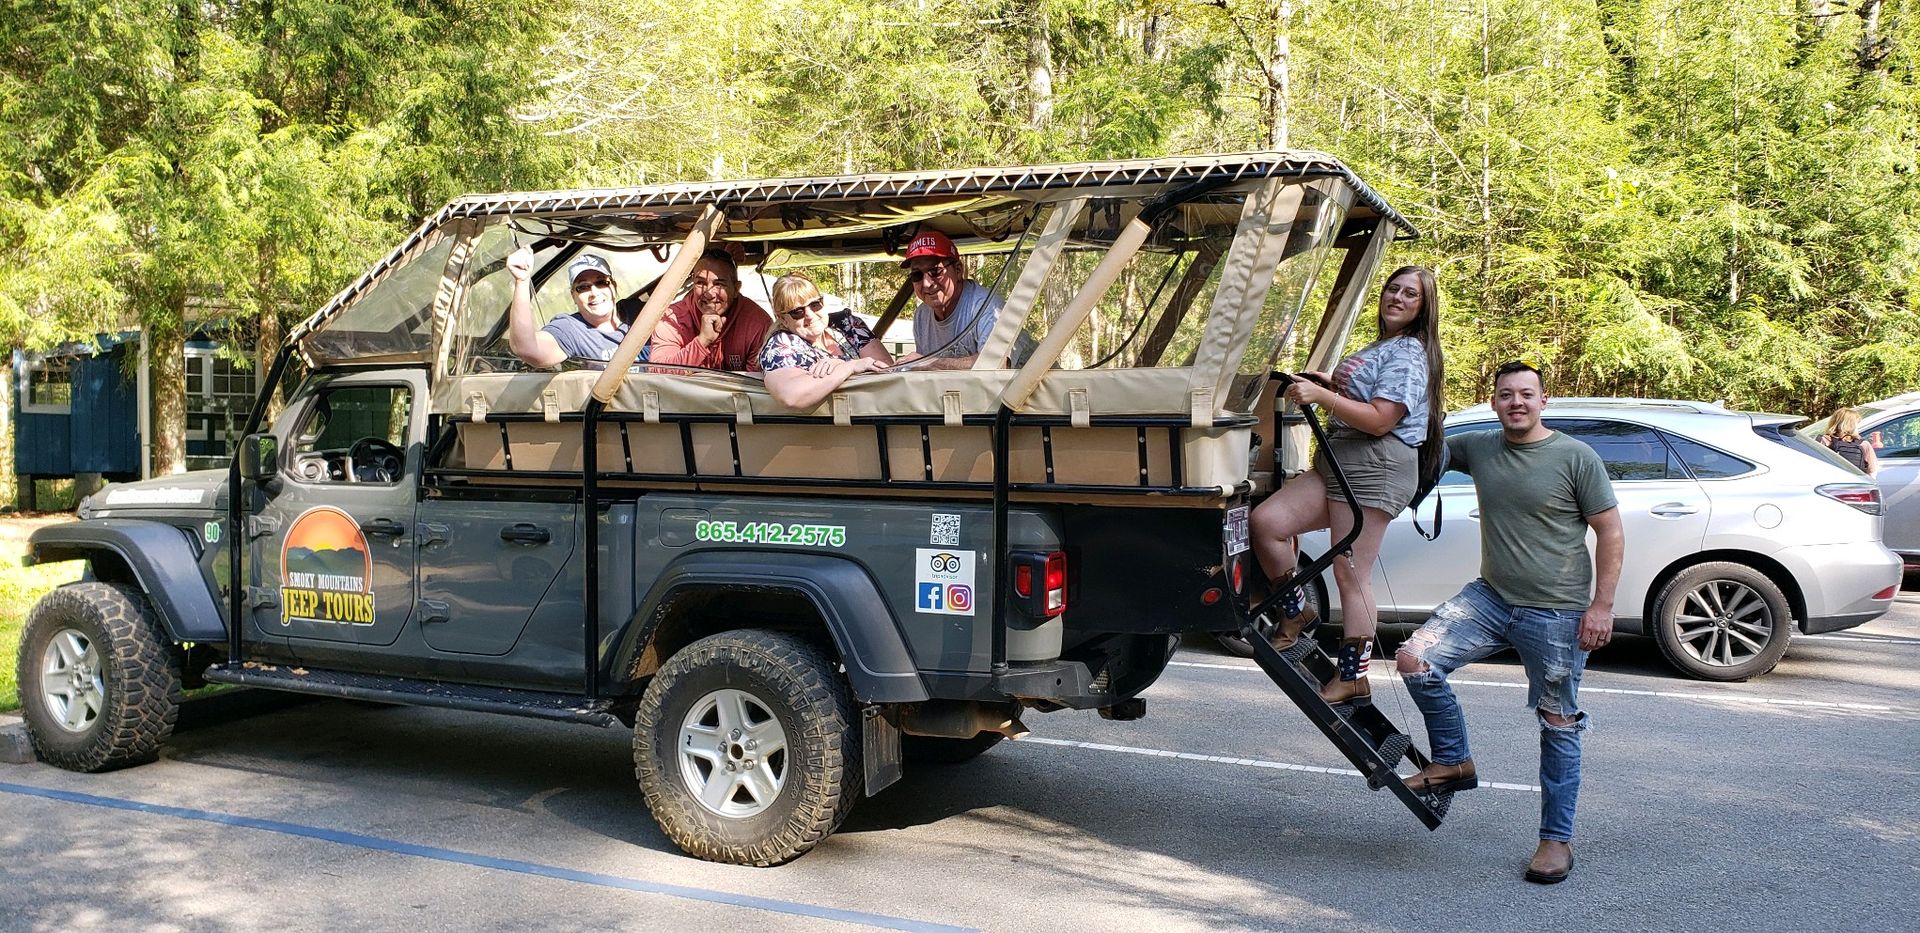 Breathtaking Jeep Adventure in Smoky Mountains With Experienced Guide & Photo-Ops image 2